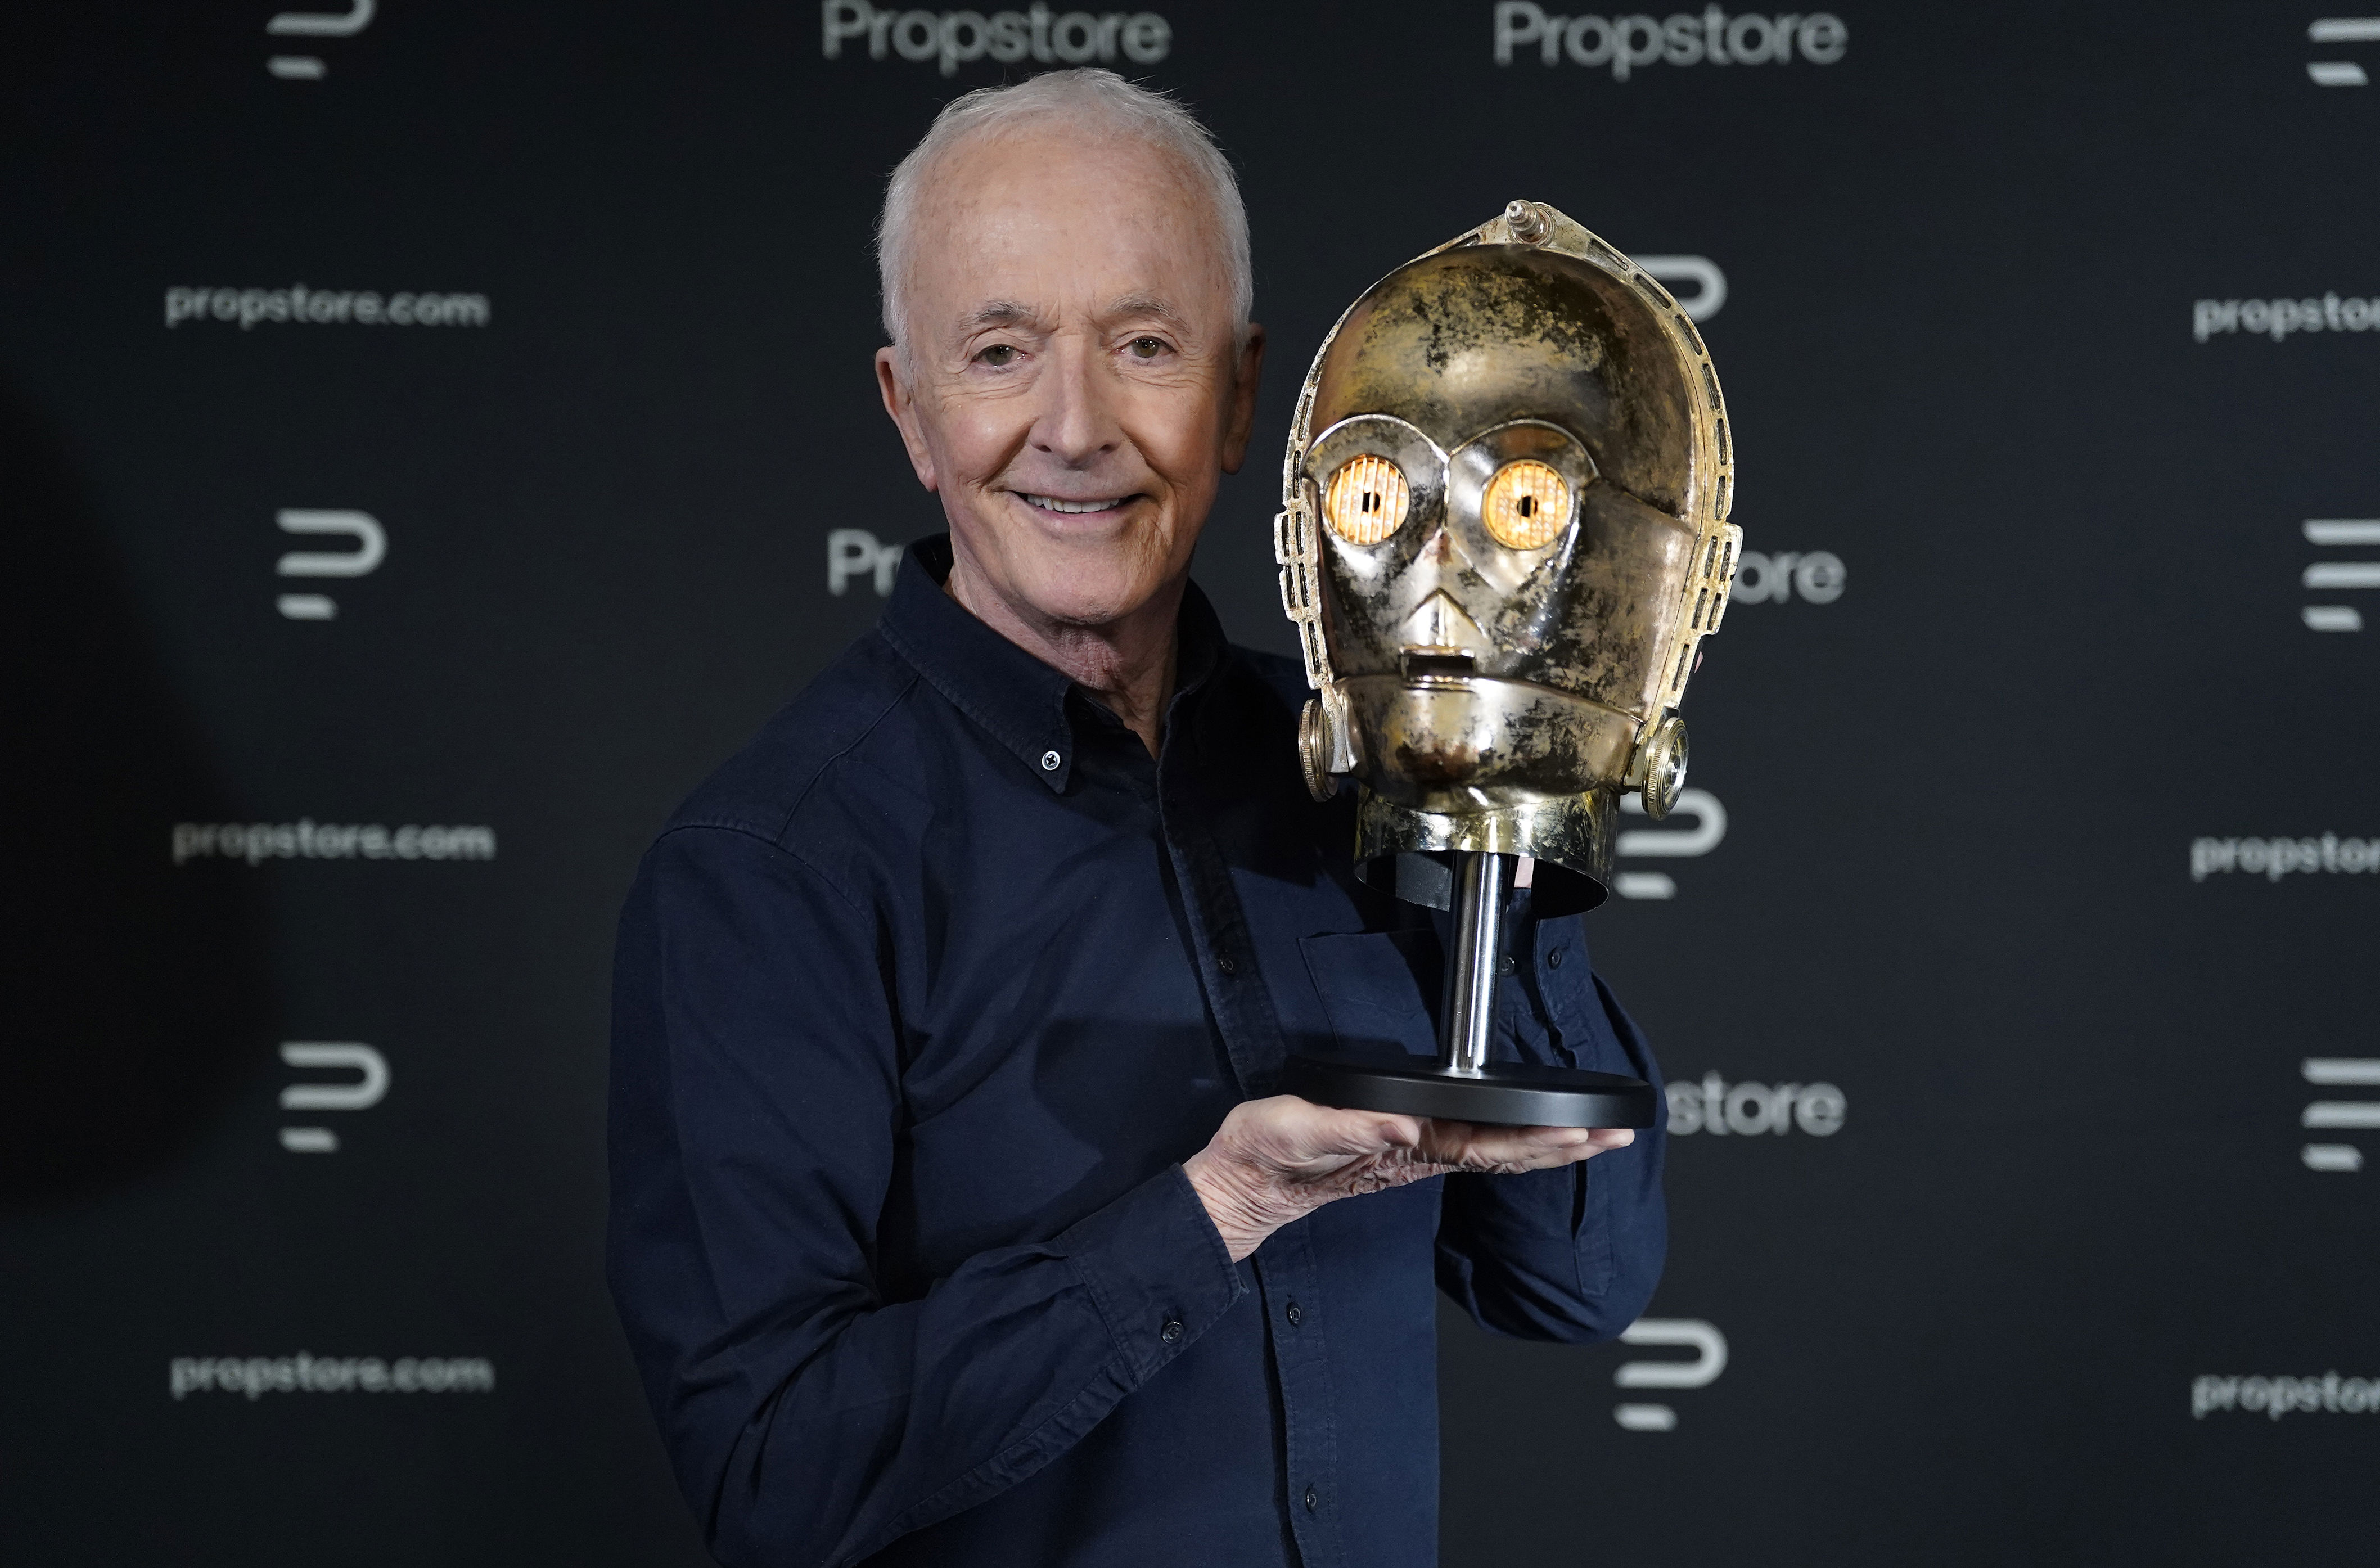 star wars c-3po head could fetch a million dollars at hollywood props auction